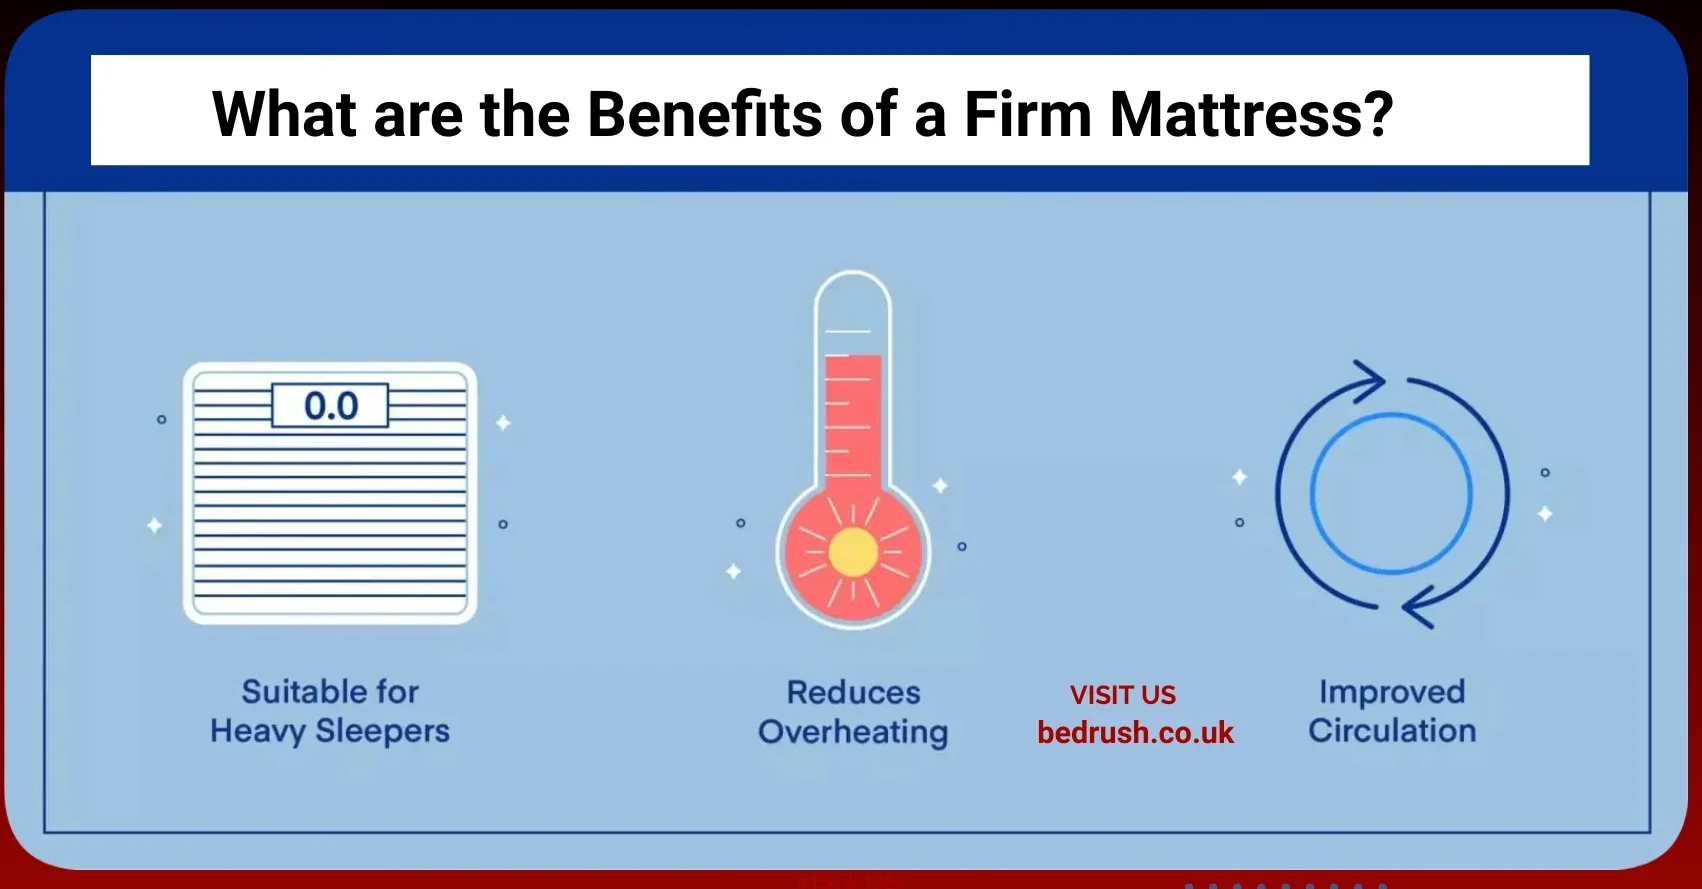 What are the Benefits of a Firm Mattress?